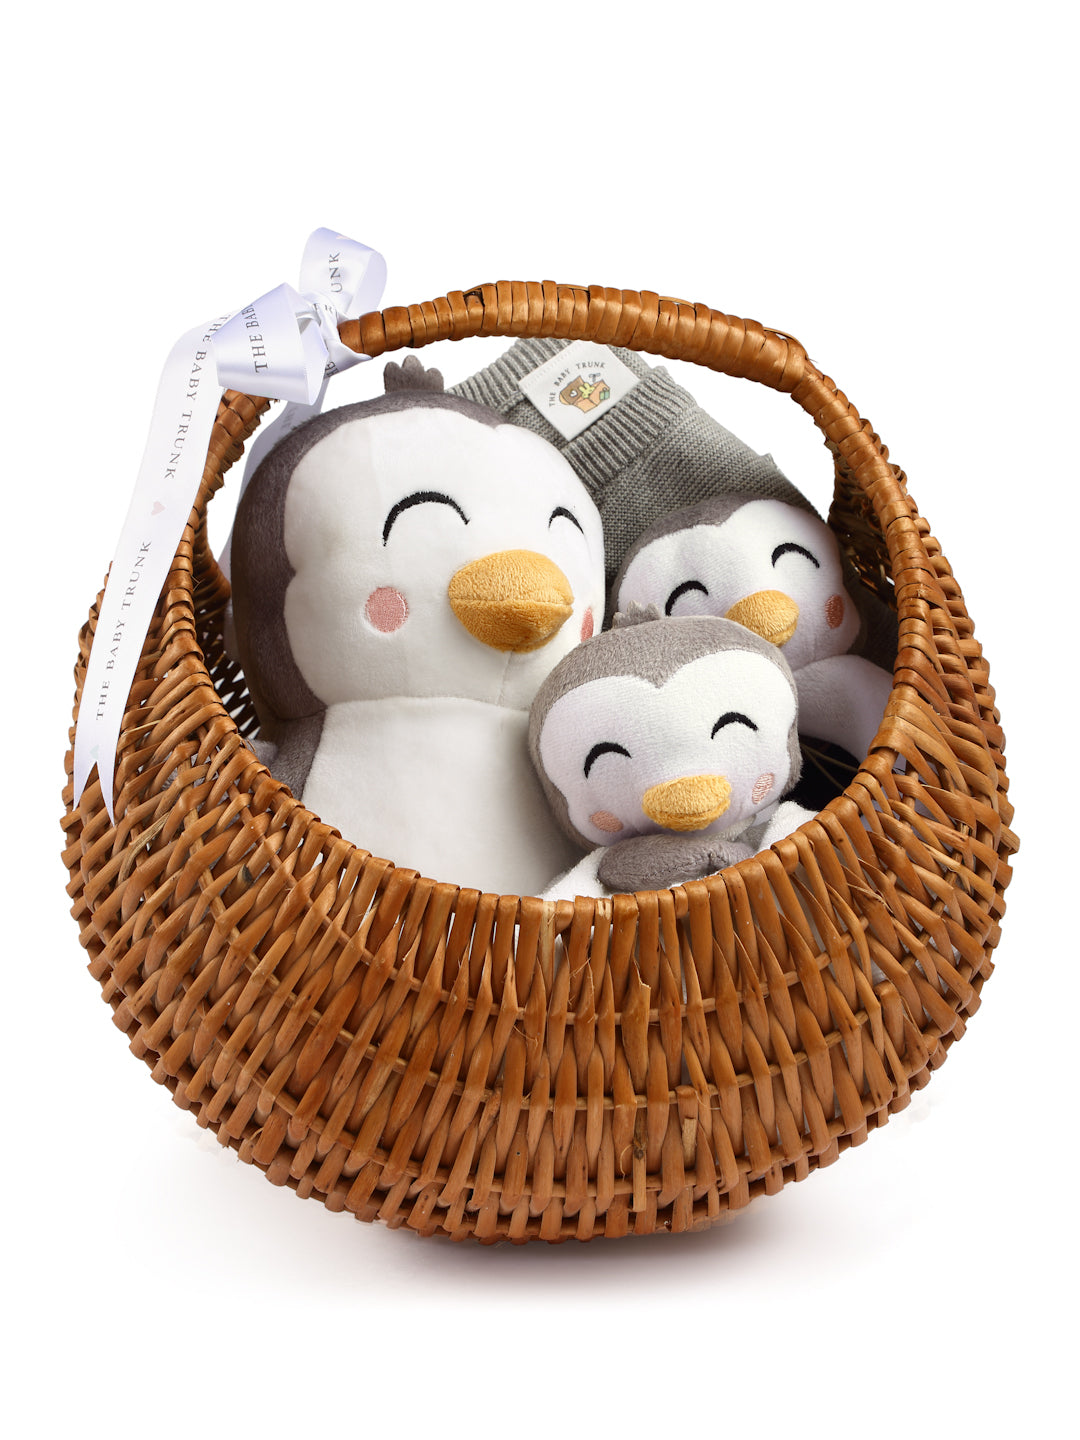 Penguin Party Gift Set